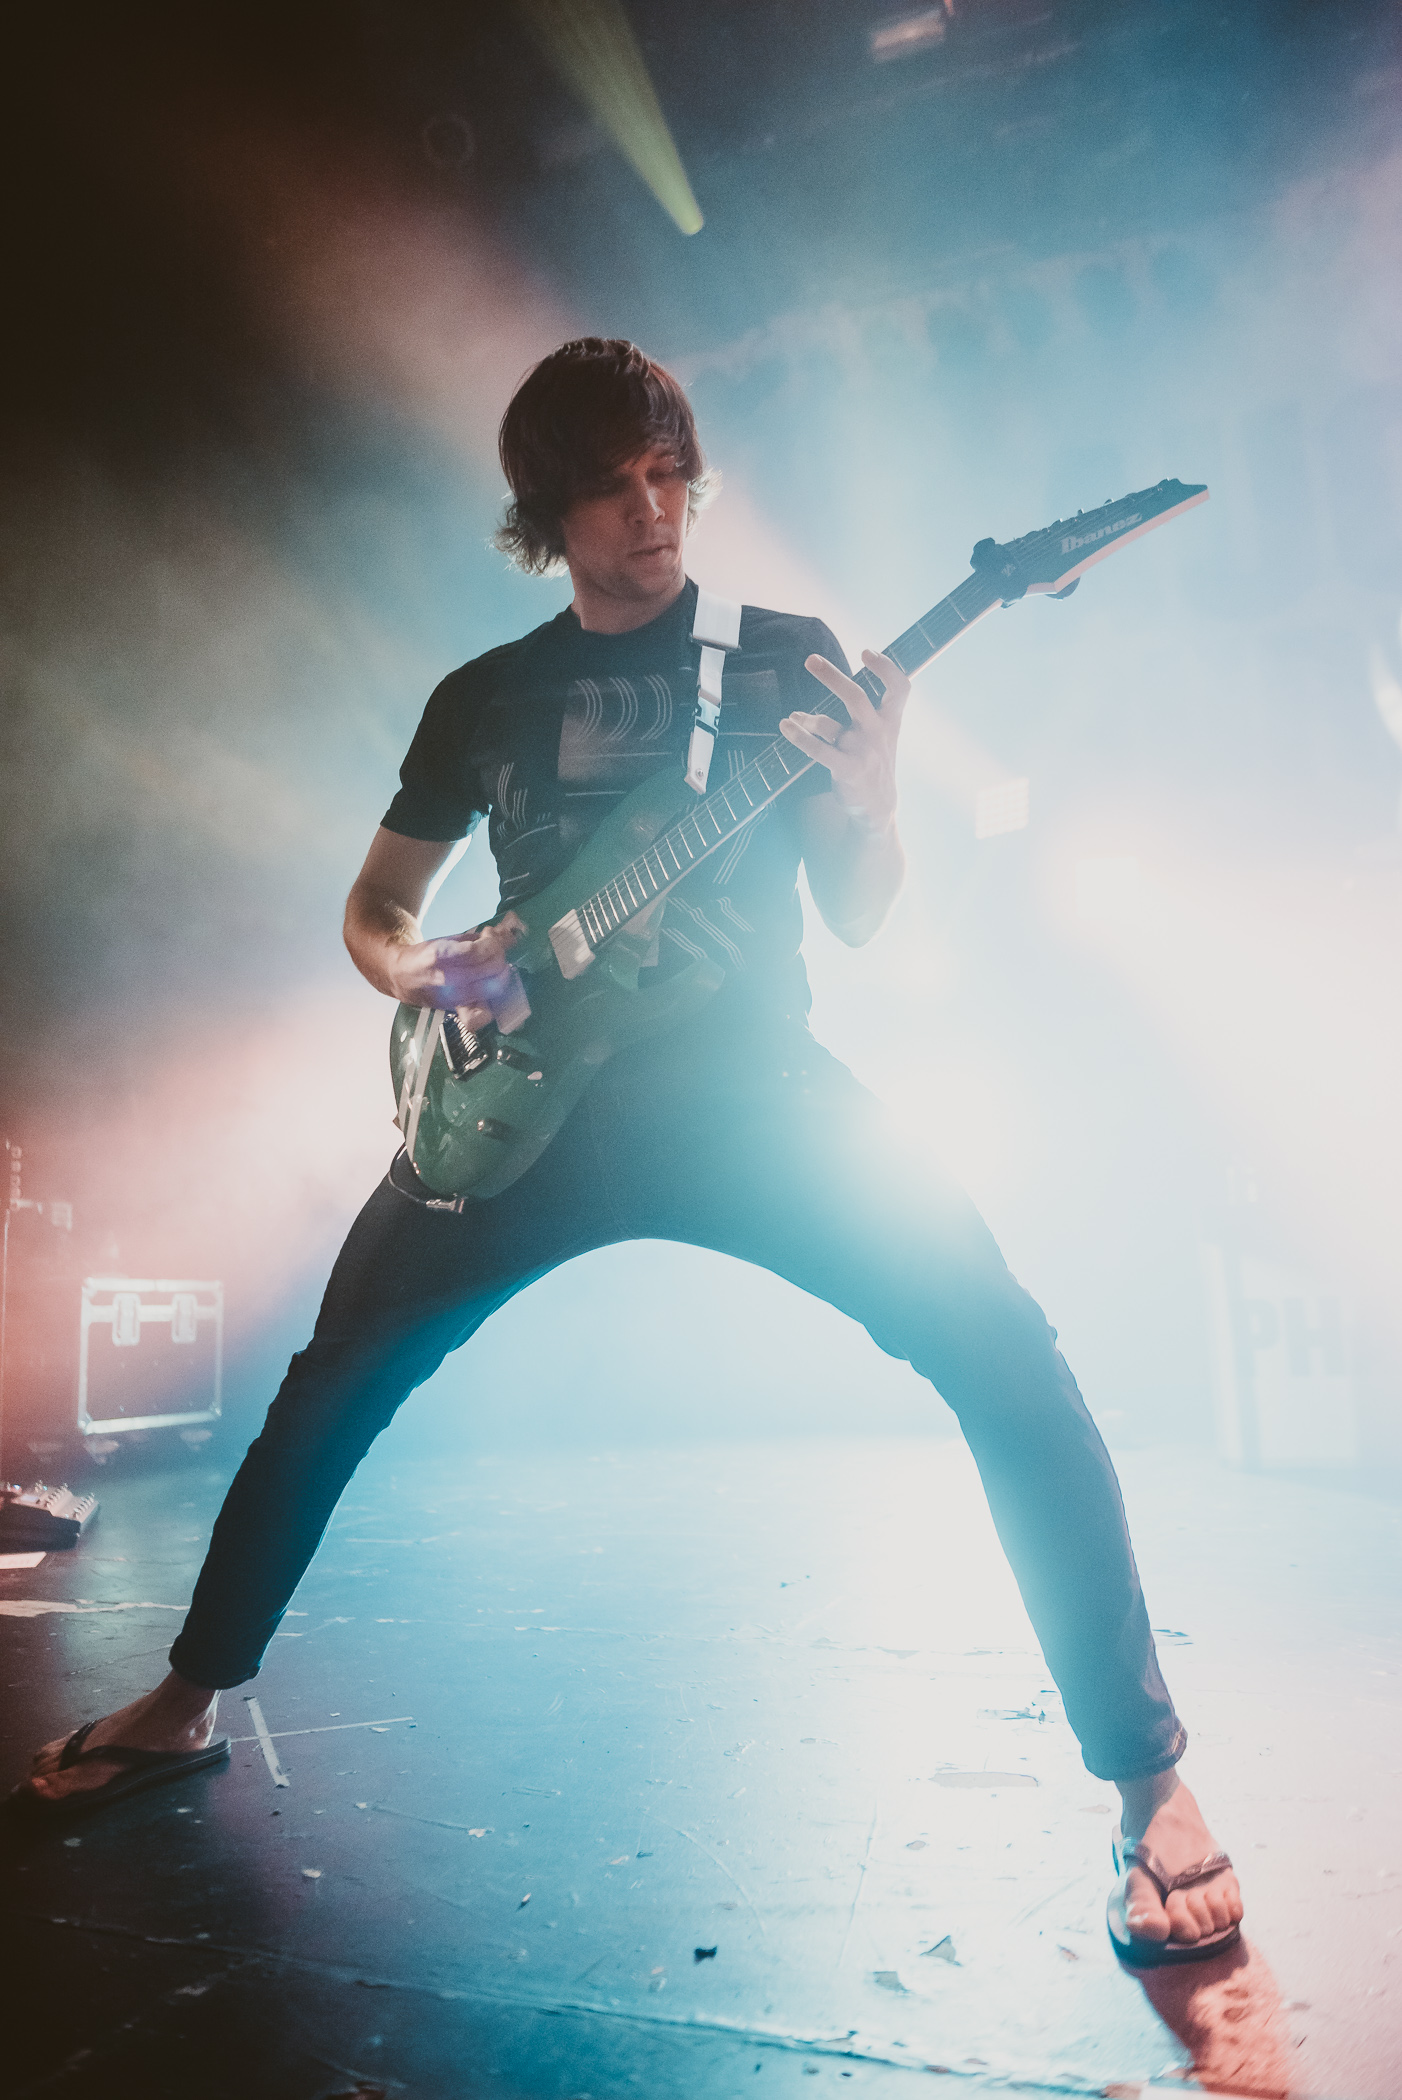 1_August_Burns_Red-Vogue_Theatre-Timothy_Nguyen-20180119 (9 of 15).jpg